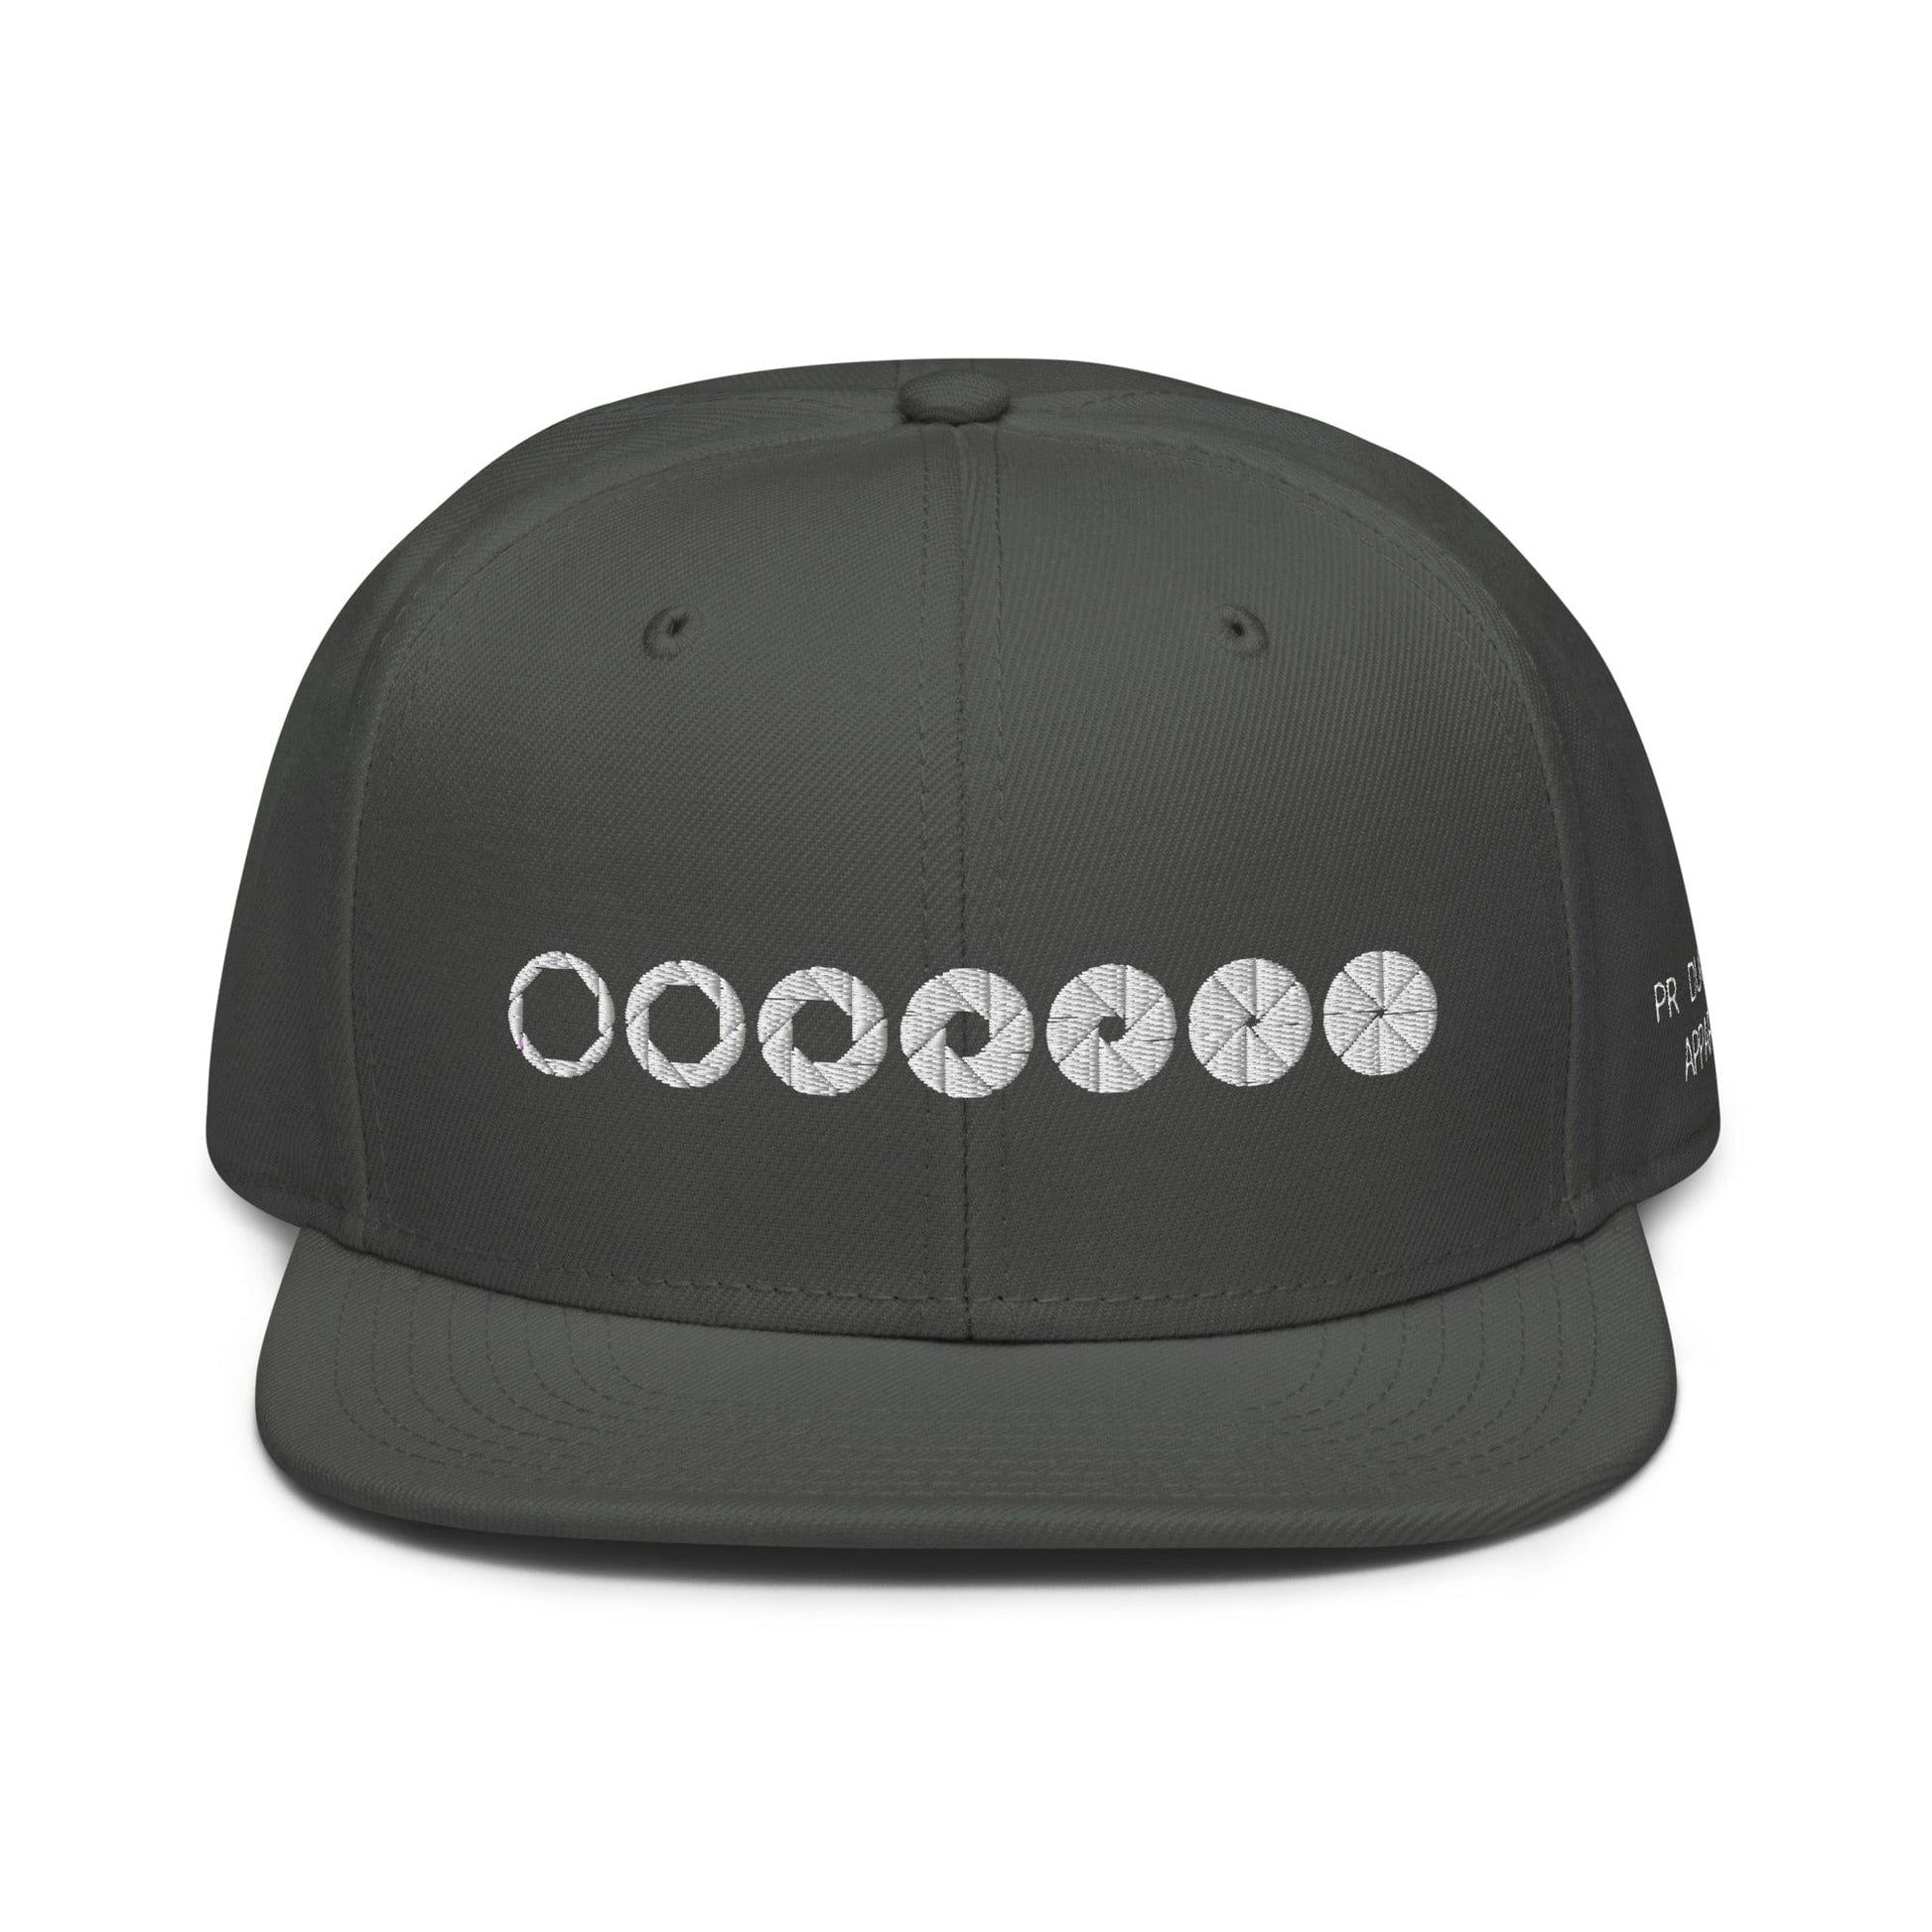 Production Apparel Shutter Hat Charcoal gray